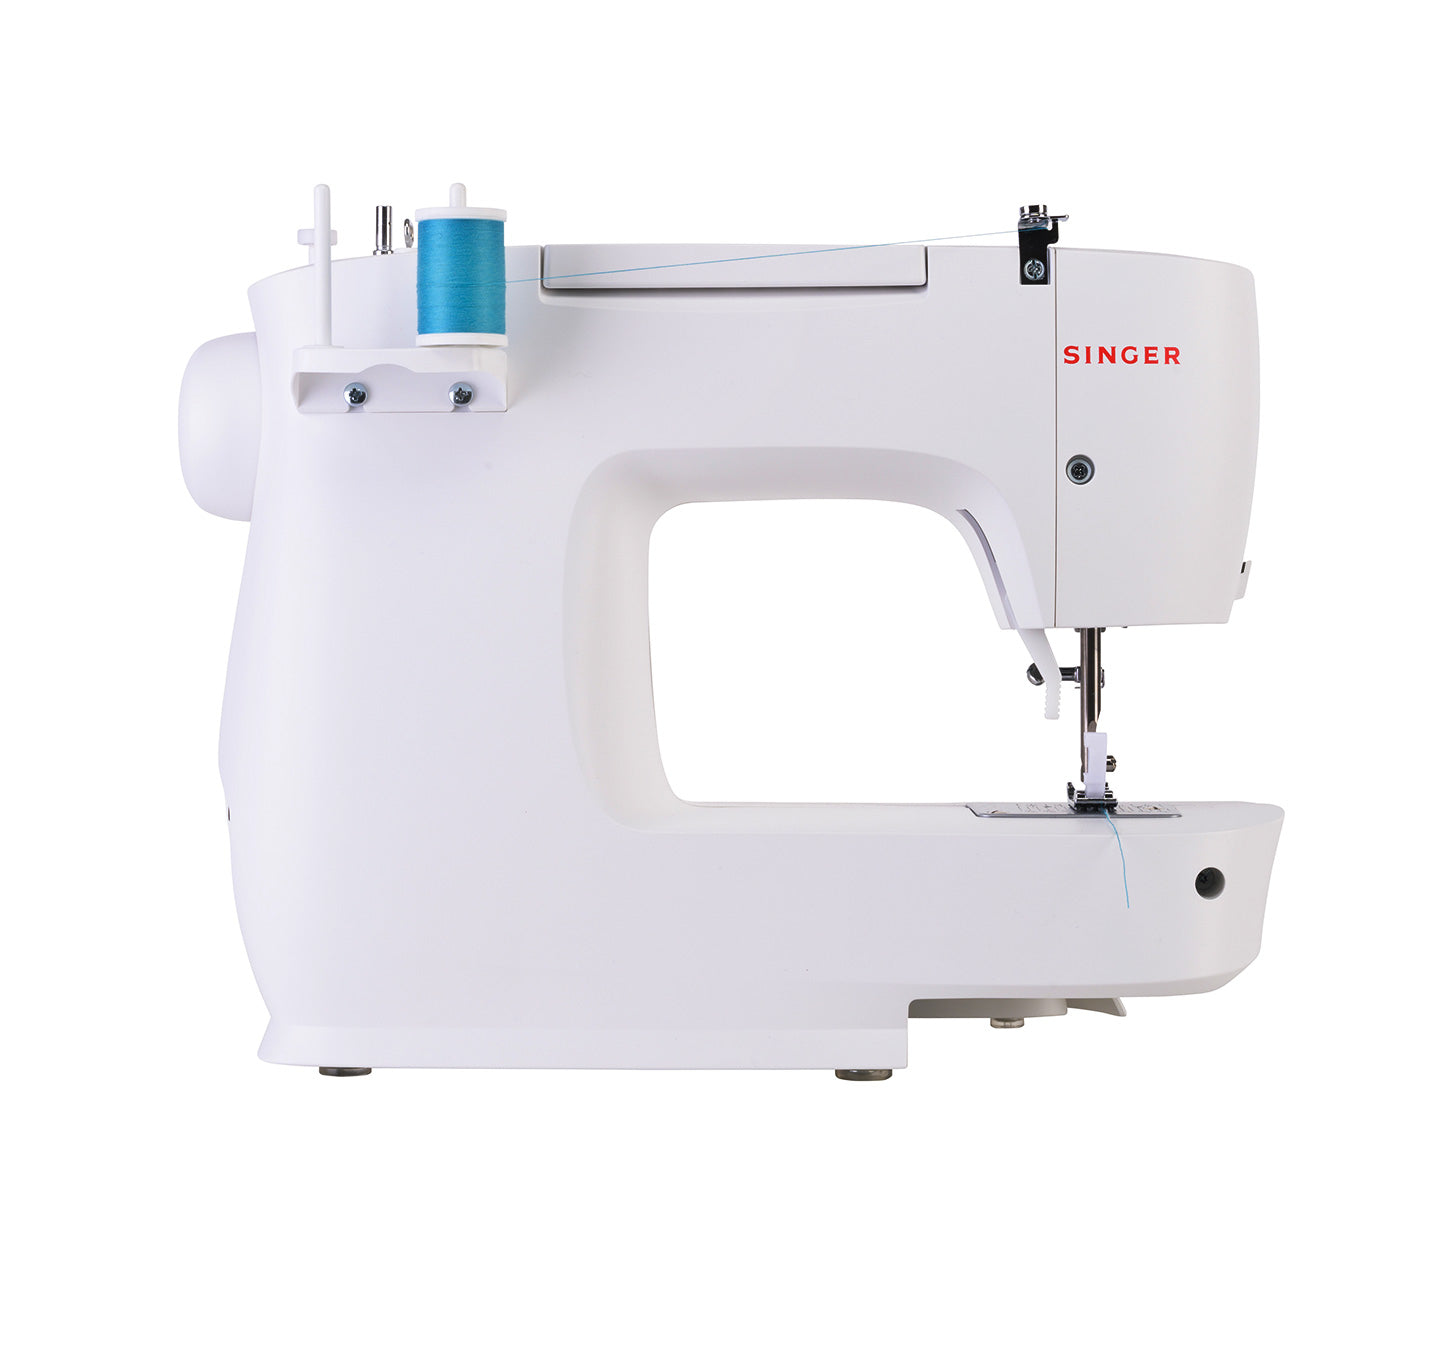 Singer M2105 Sewing Machine - Free upgrade to M2405 on this offer